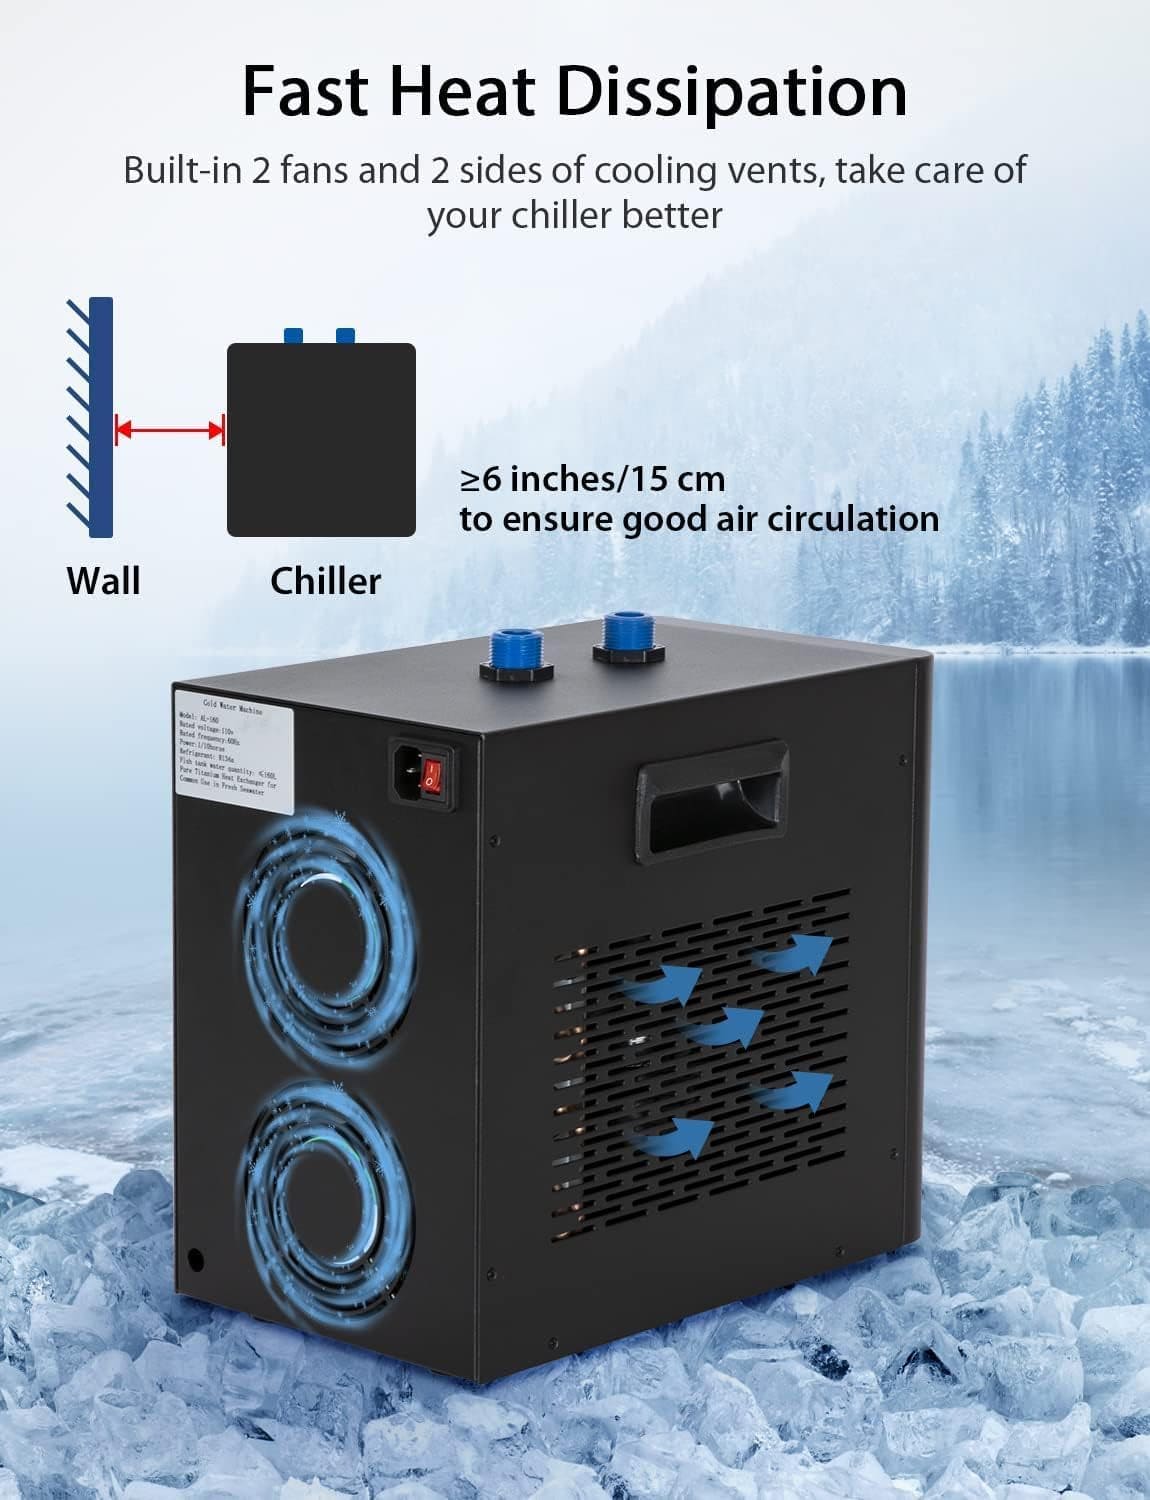 79 Gal Aquarium Chiller, 1/3 HP Fish Tank Water Chiller with Quiet Design Compressor, Refrigeration for Hydroponic System Axolotl Jellyfish Coral Reef 300L, Black